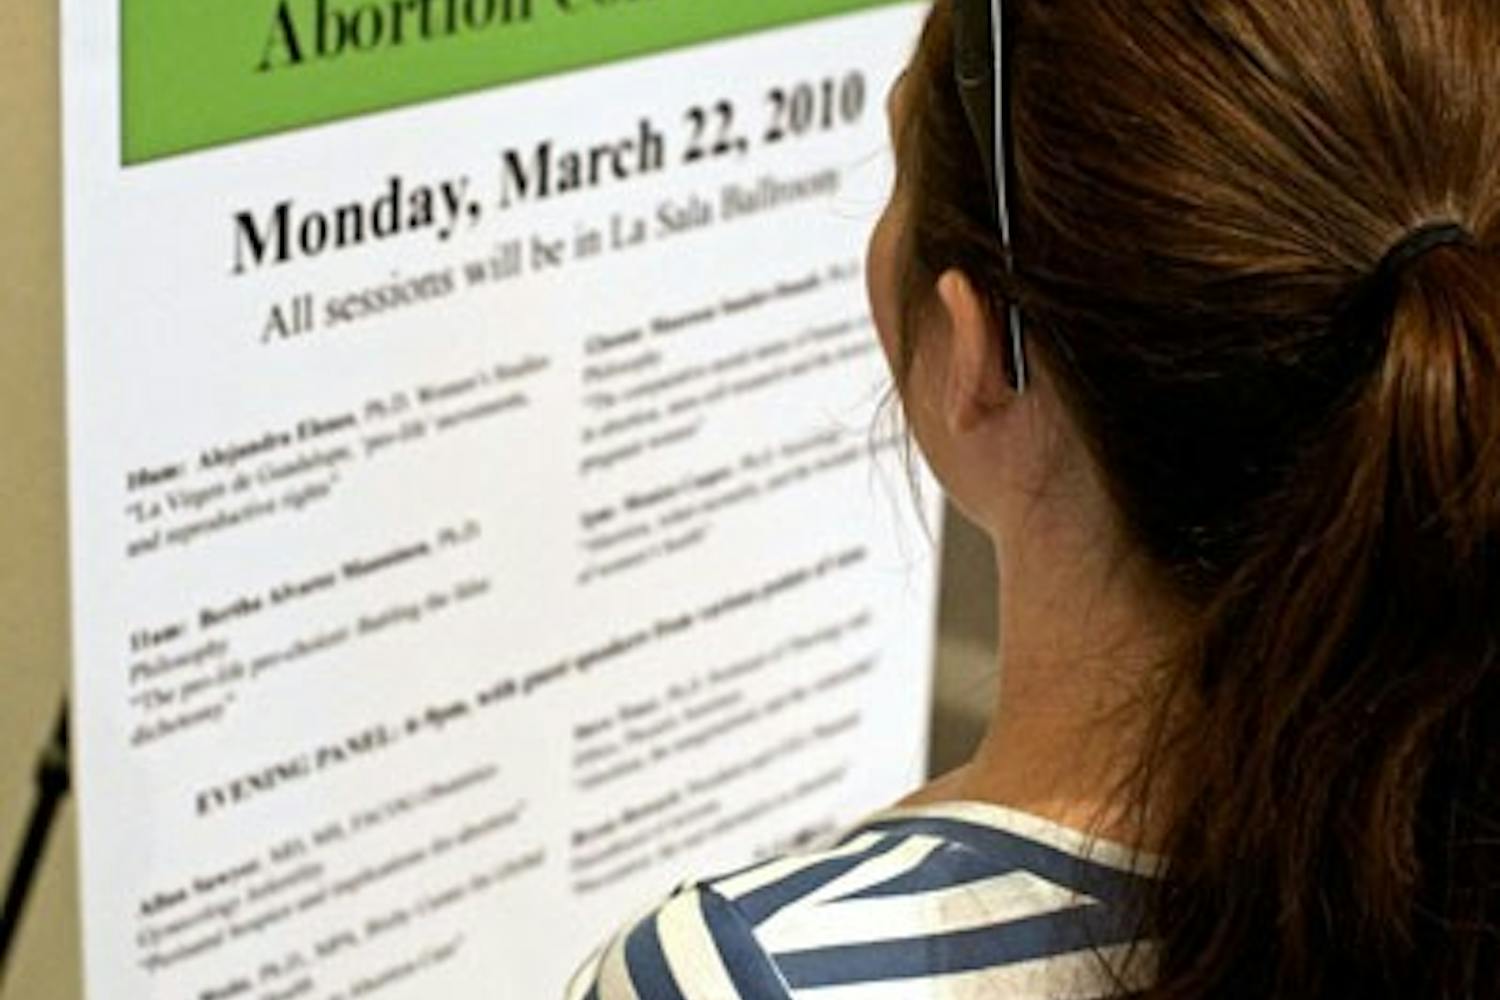 THE HOT TOPIC: A student on the West campus previews the day's schedule for the daylong abortion-themed conference. "Seeking Coverage in the Abortion Controversy" features various ASU professors who speak on topics ranging from stem cell research to infant mortality. (Photo by Michael Arellano)